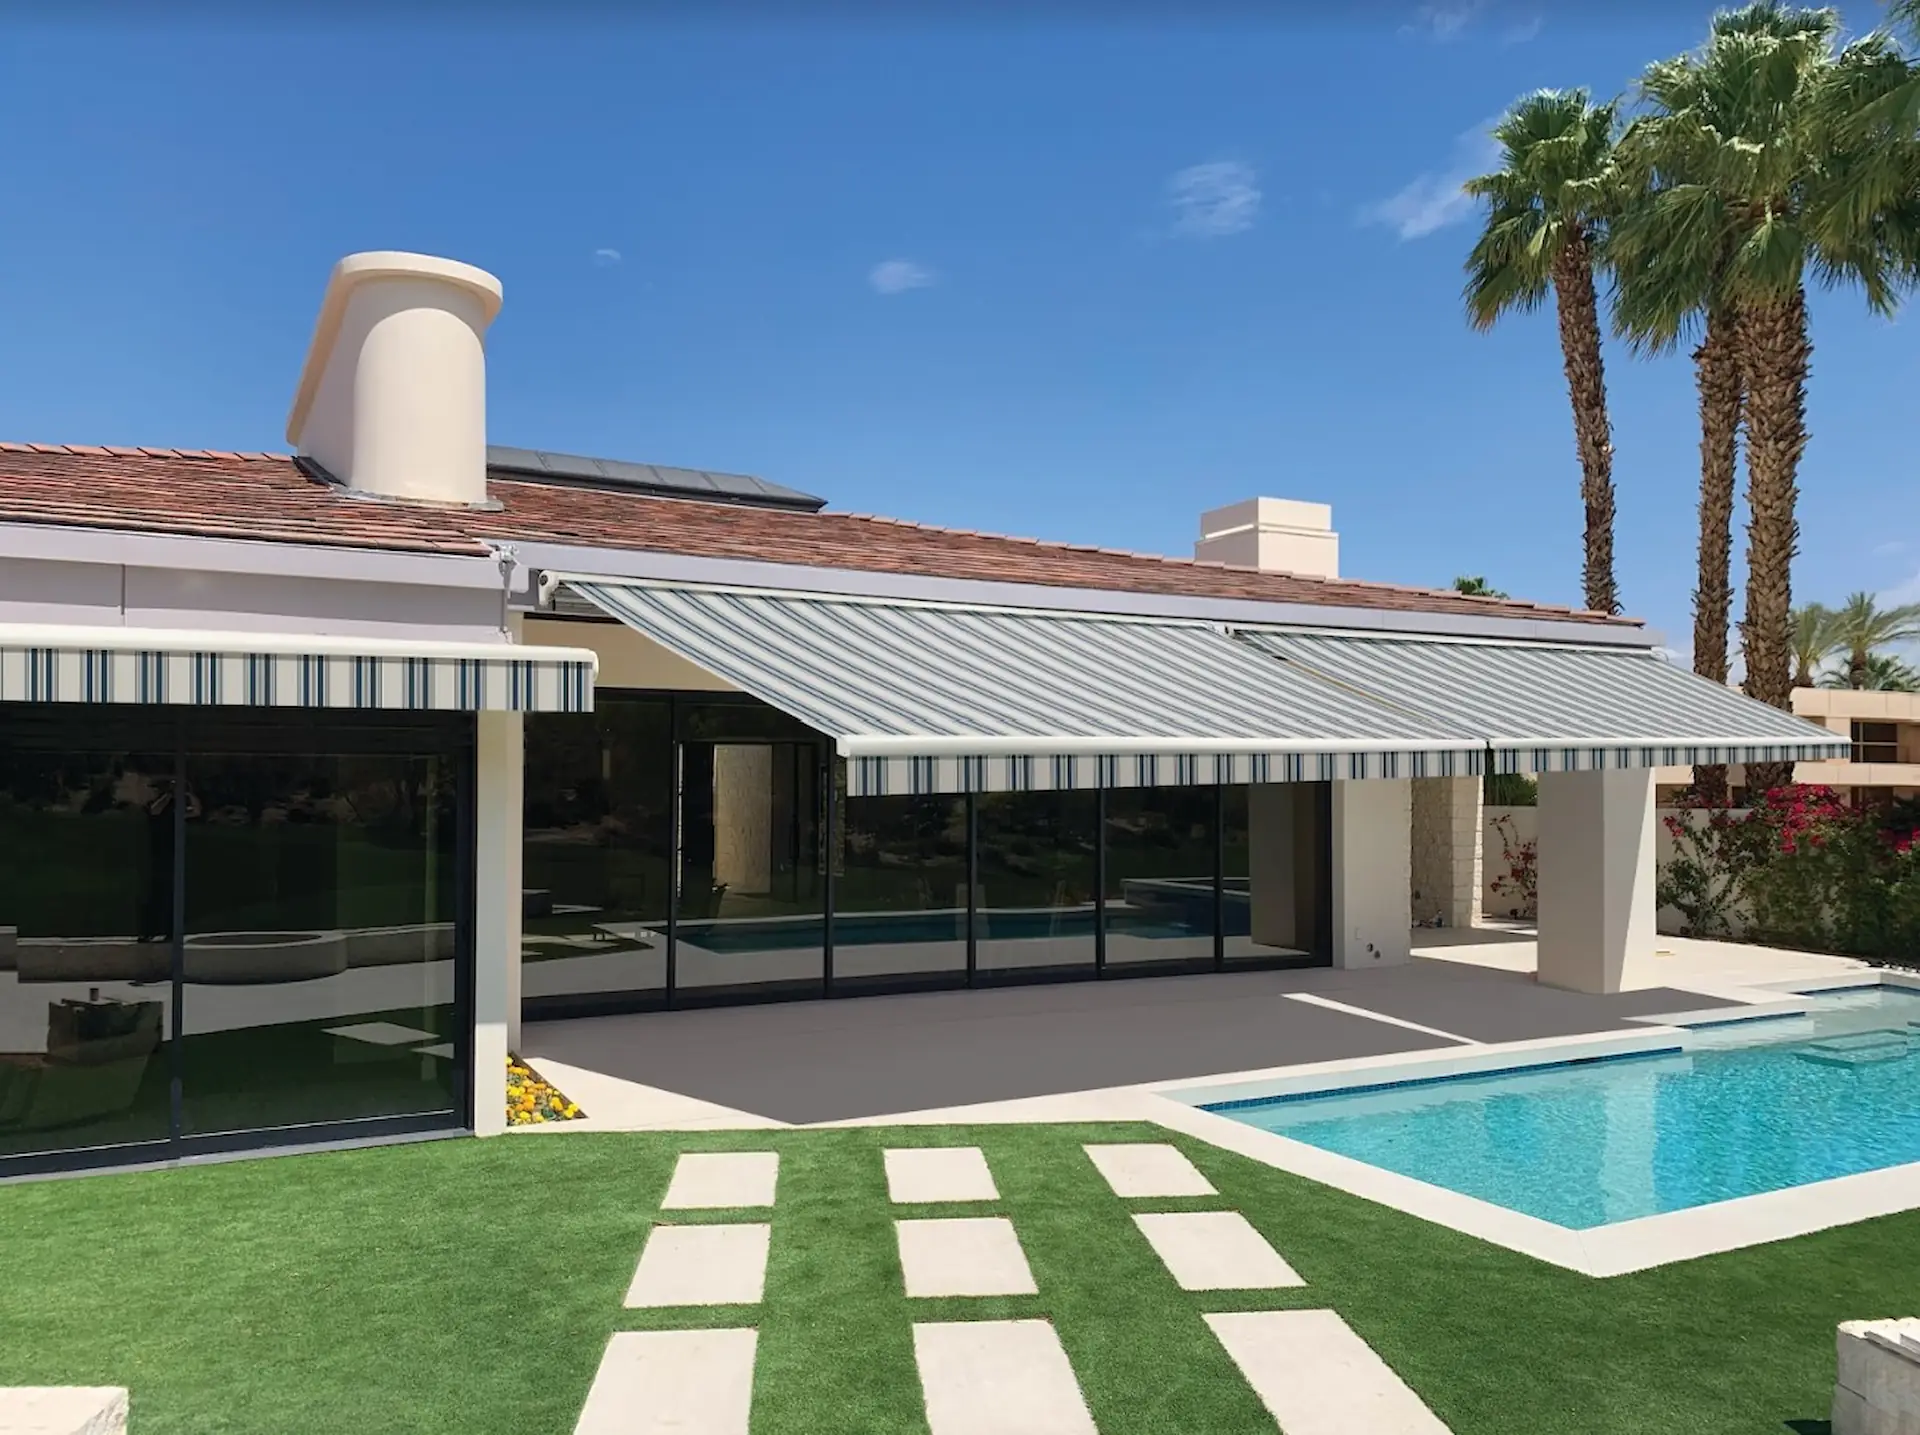 Exterior shot of a ranch home with a striped retractable awning extended over the patio. Striped patterns like these are a popular look for a quality awning.